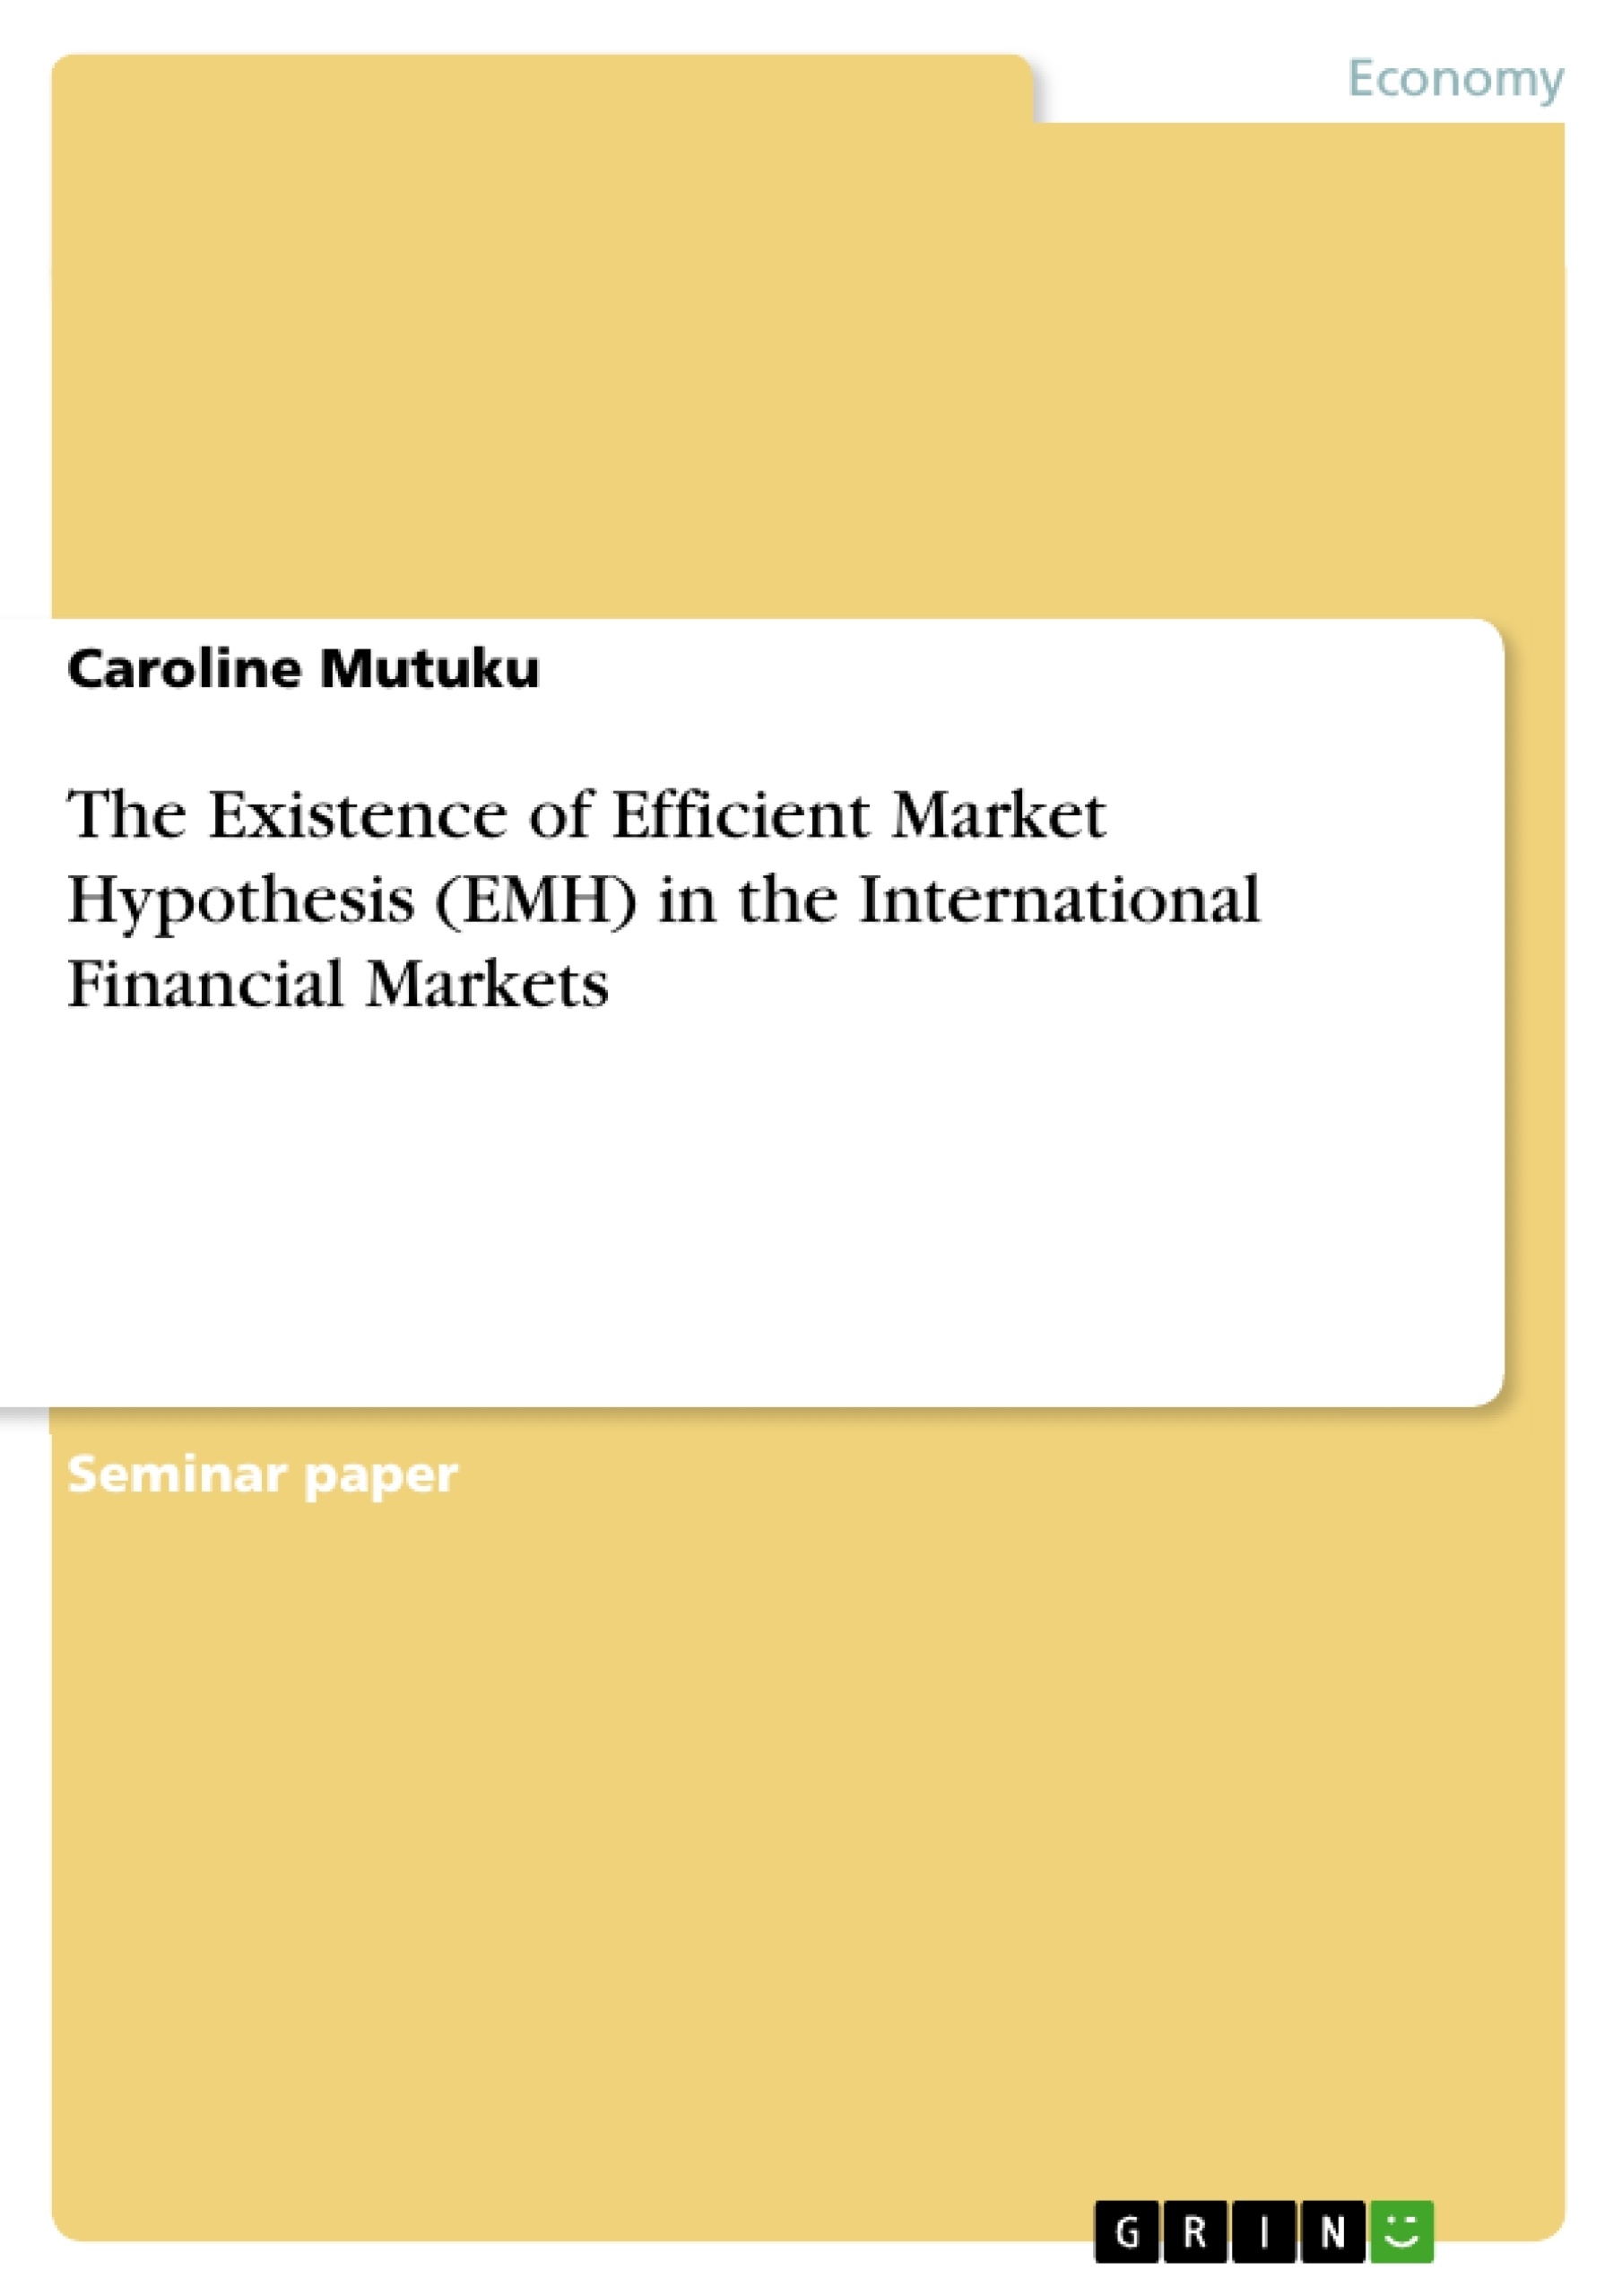 Title: The Existence of Efficient Market Hypothesis (EMH) in the International Financial Markets